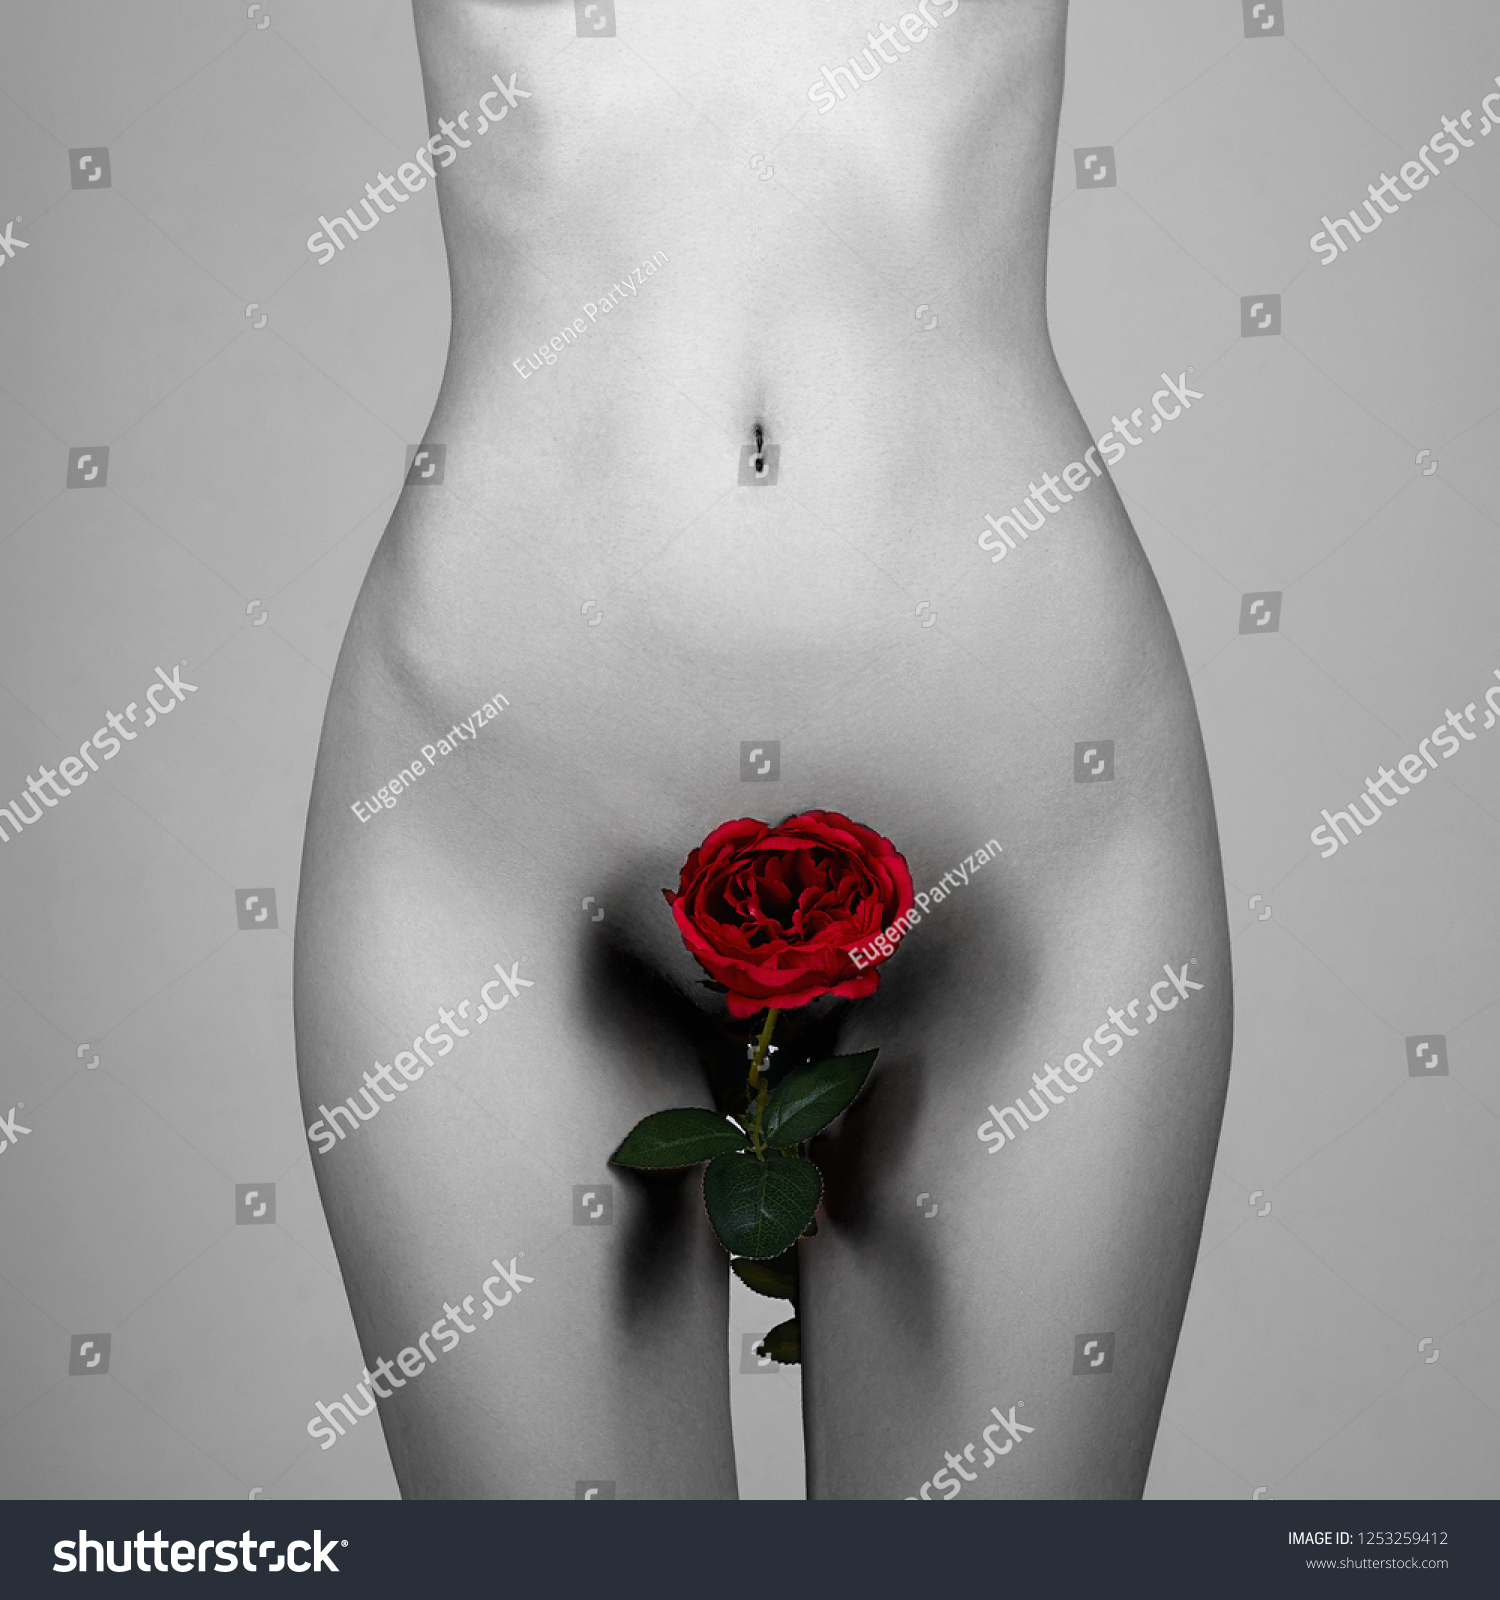 Red rose nudes